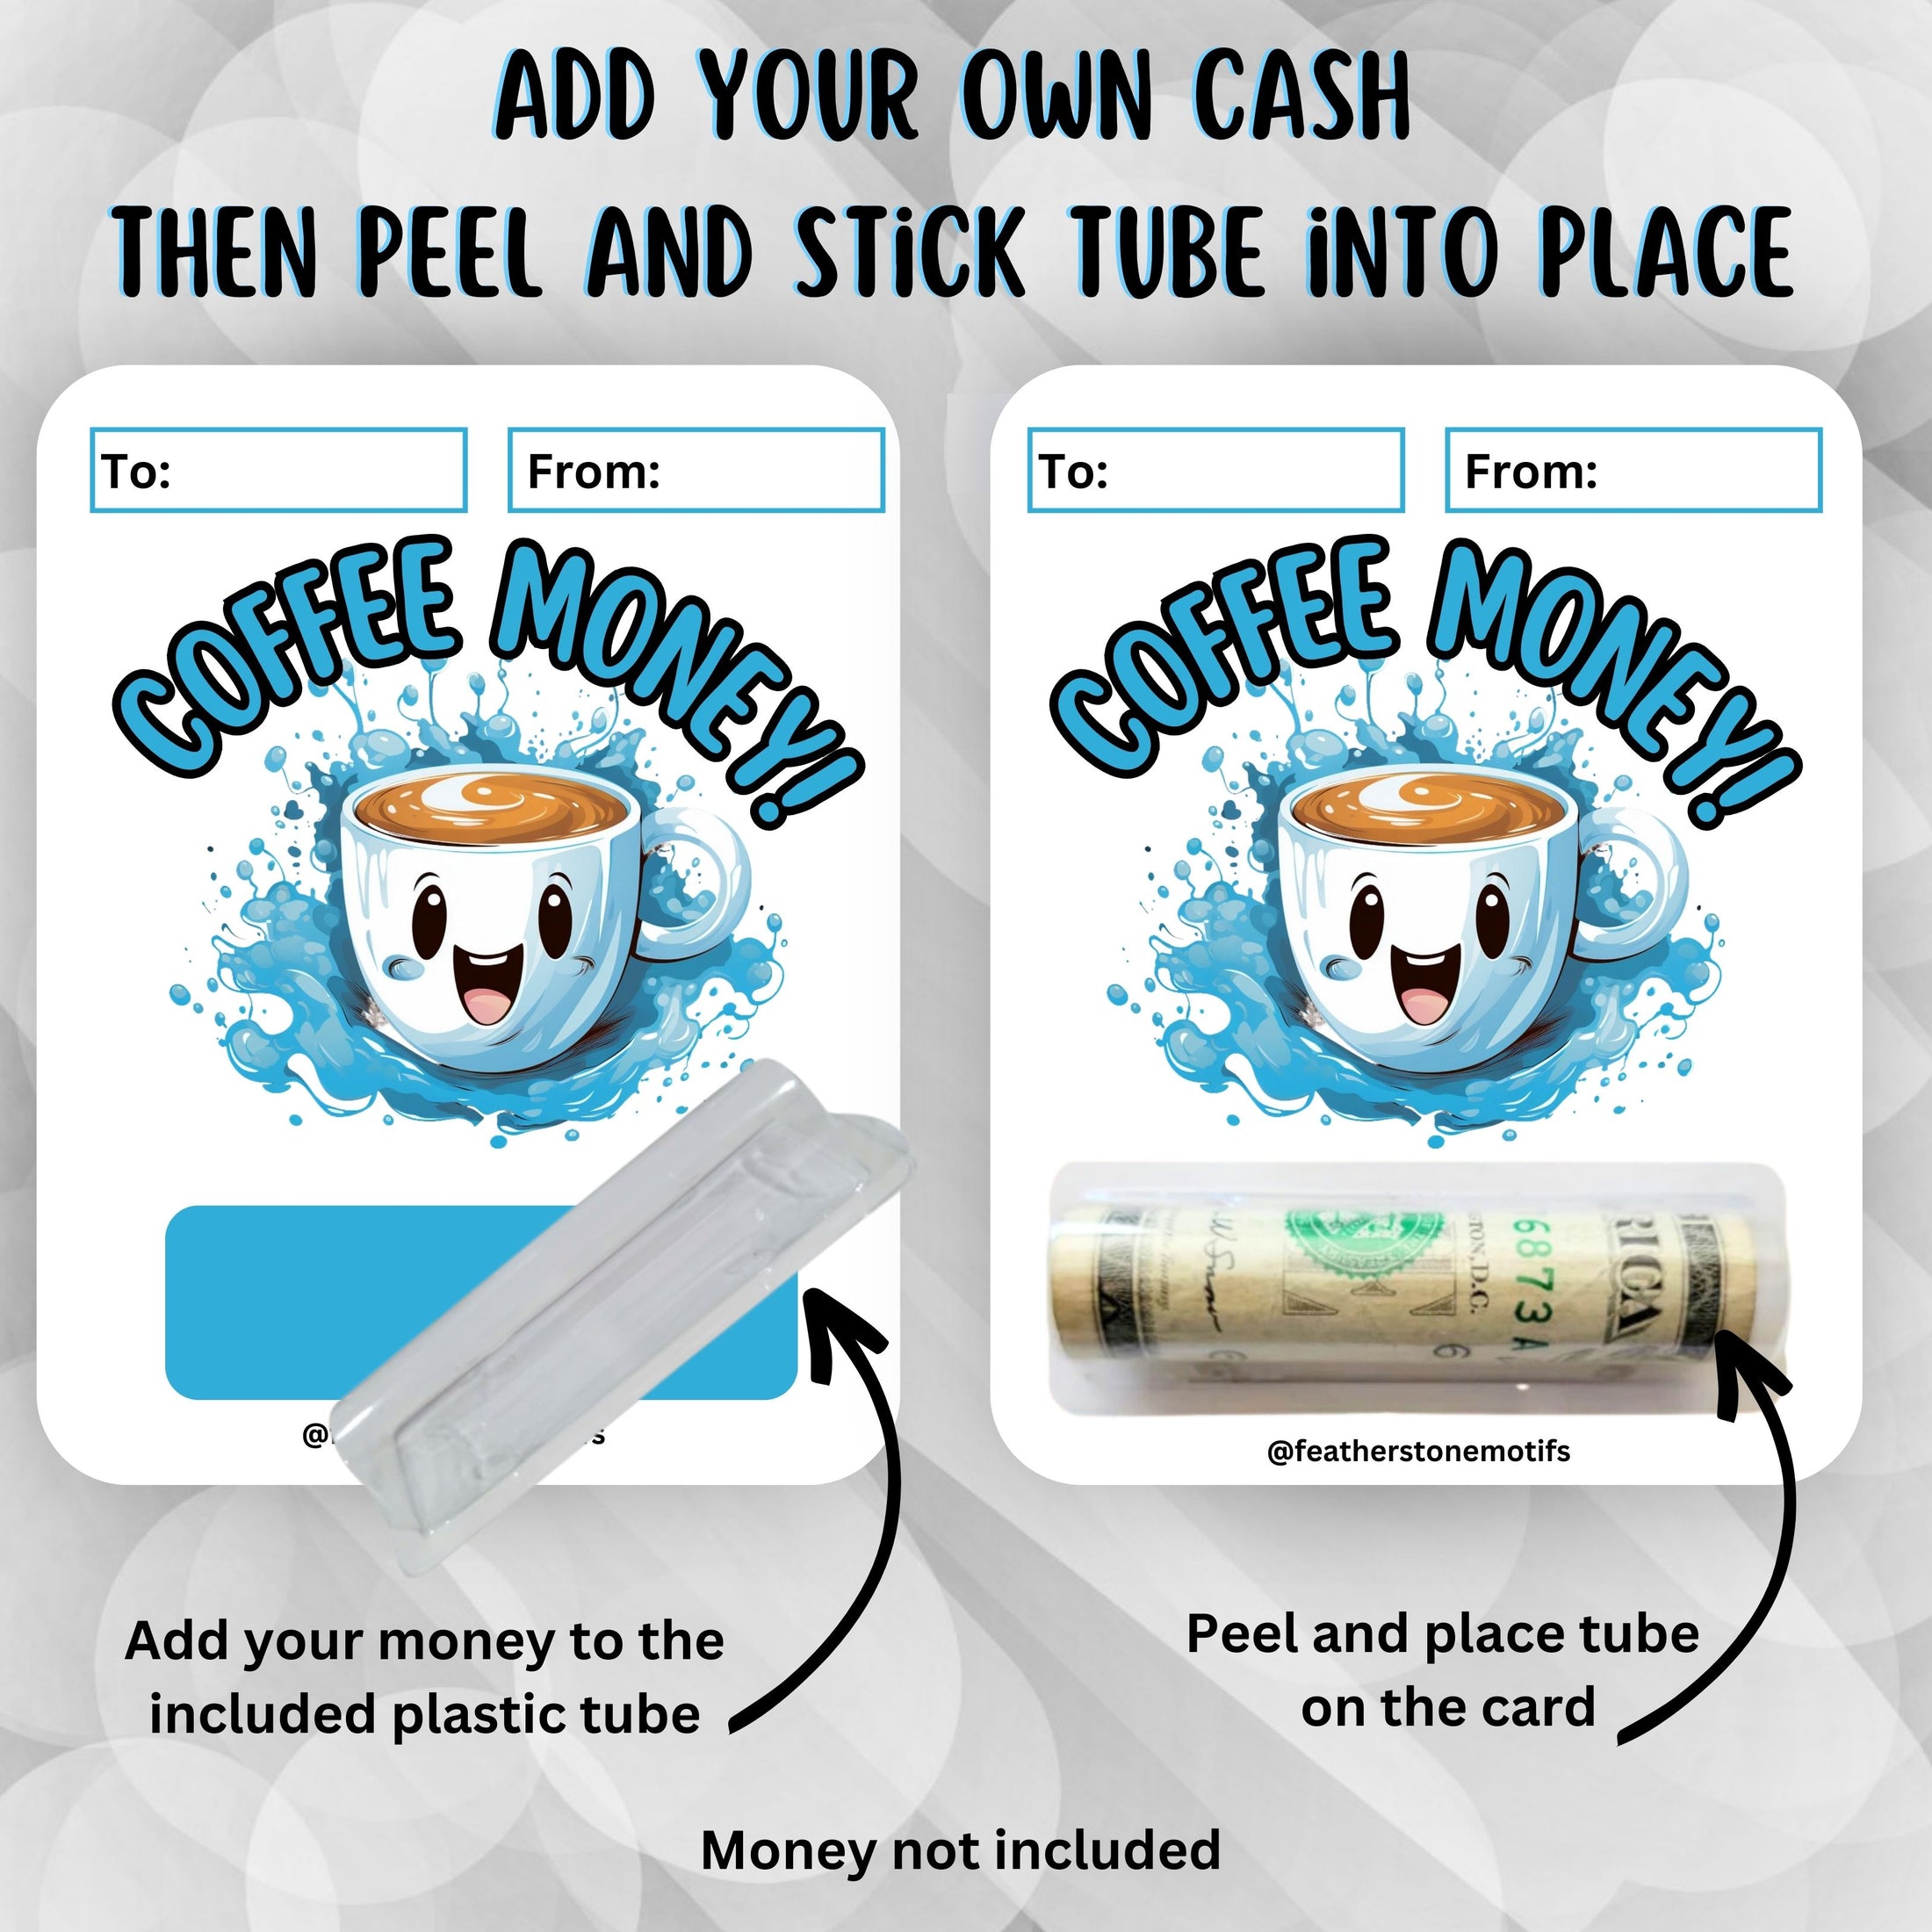 This image shows how to attach the money tube to the Coffee Money Card.